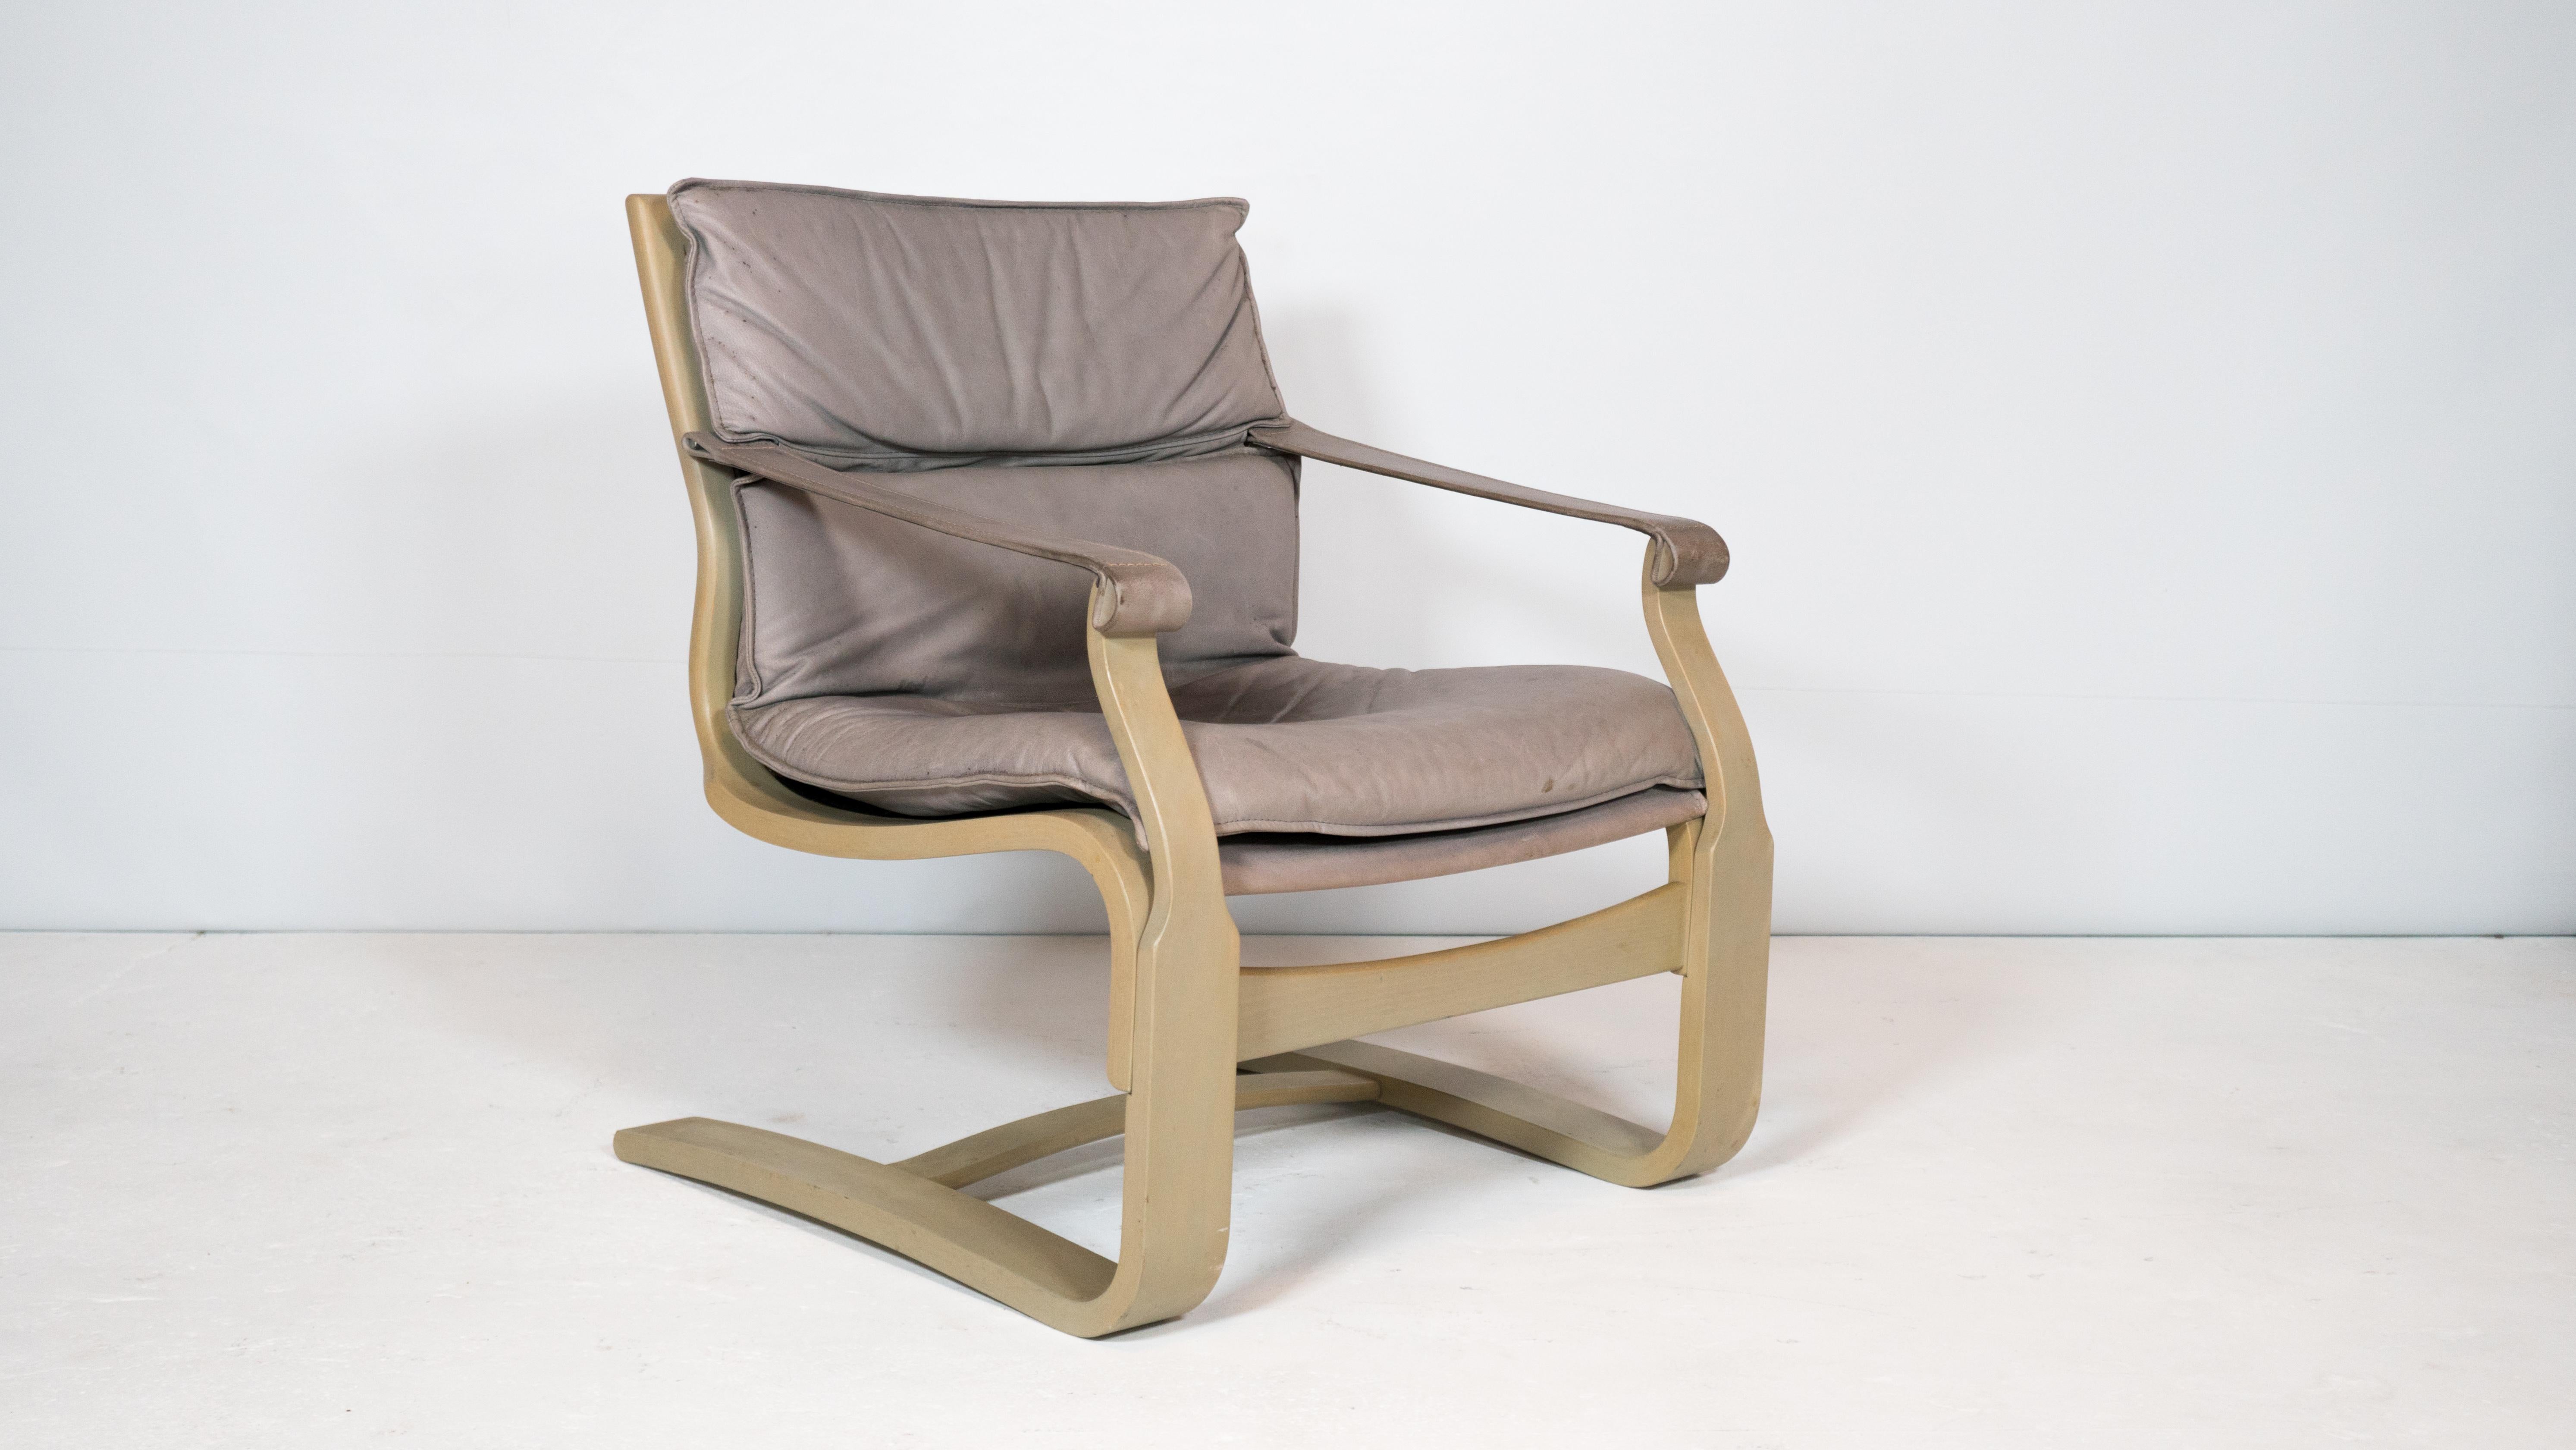 1970s Ake Fribytter Bentwood and Leather Lounge Chair for Nelo In Good Condition For Sale In Boston, MA